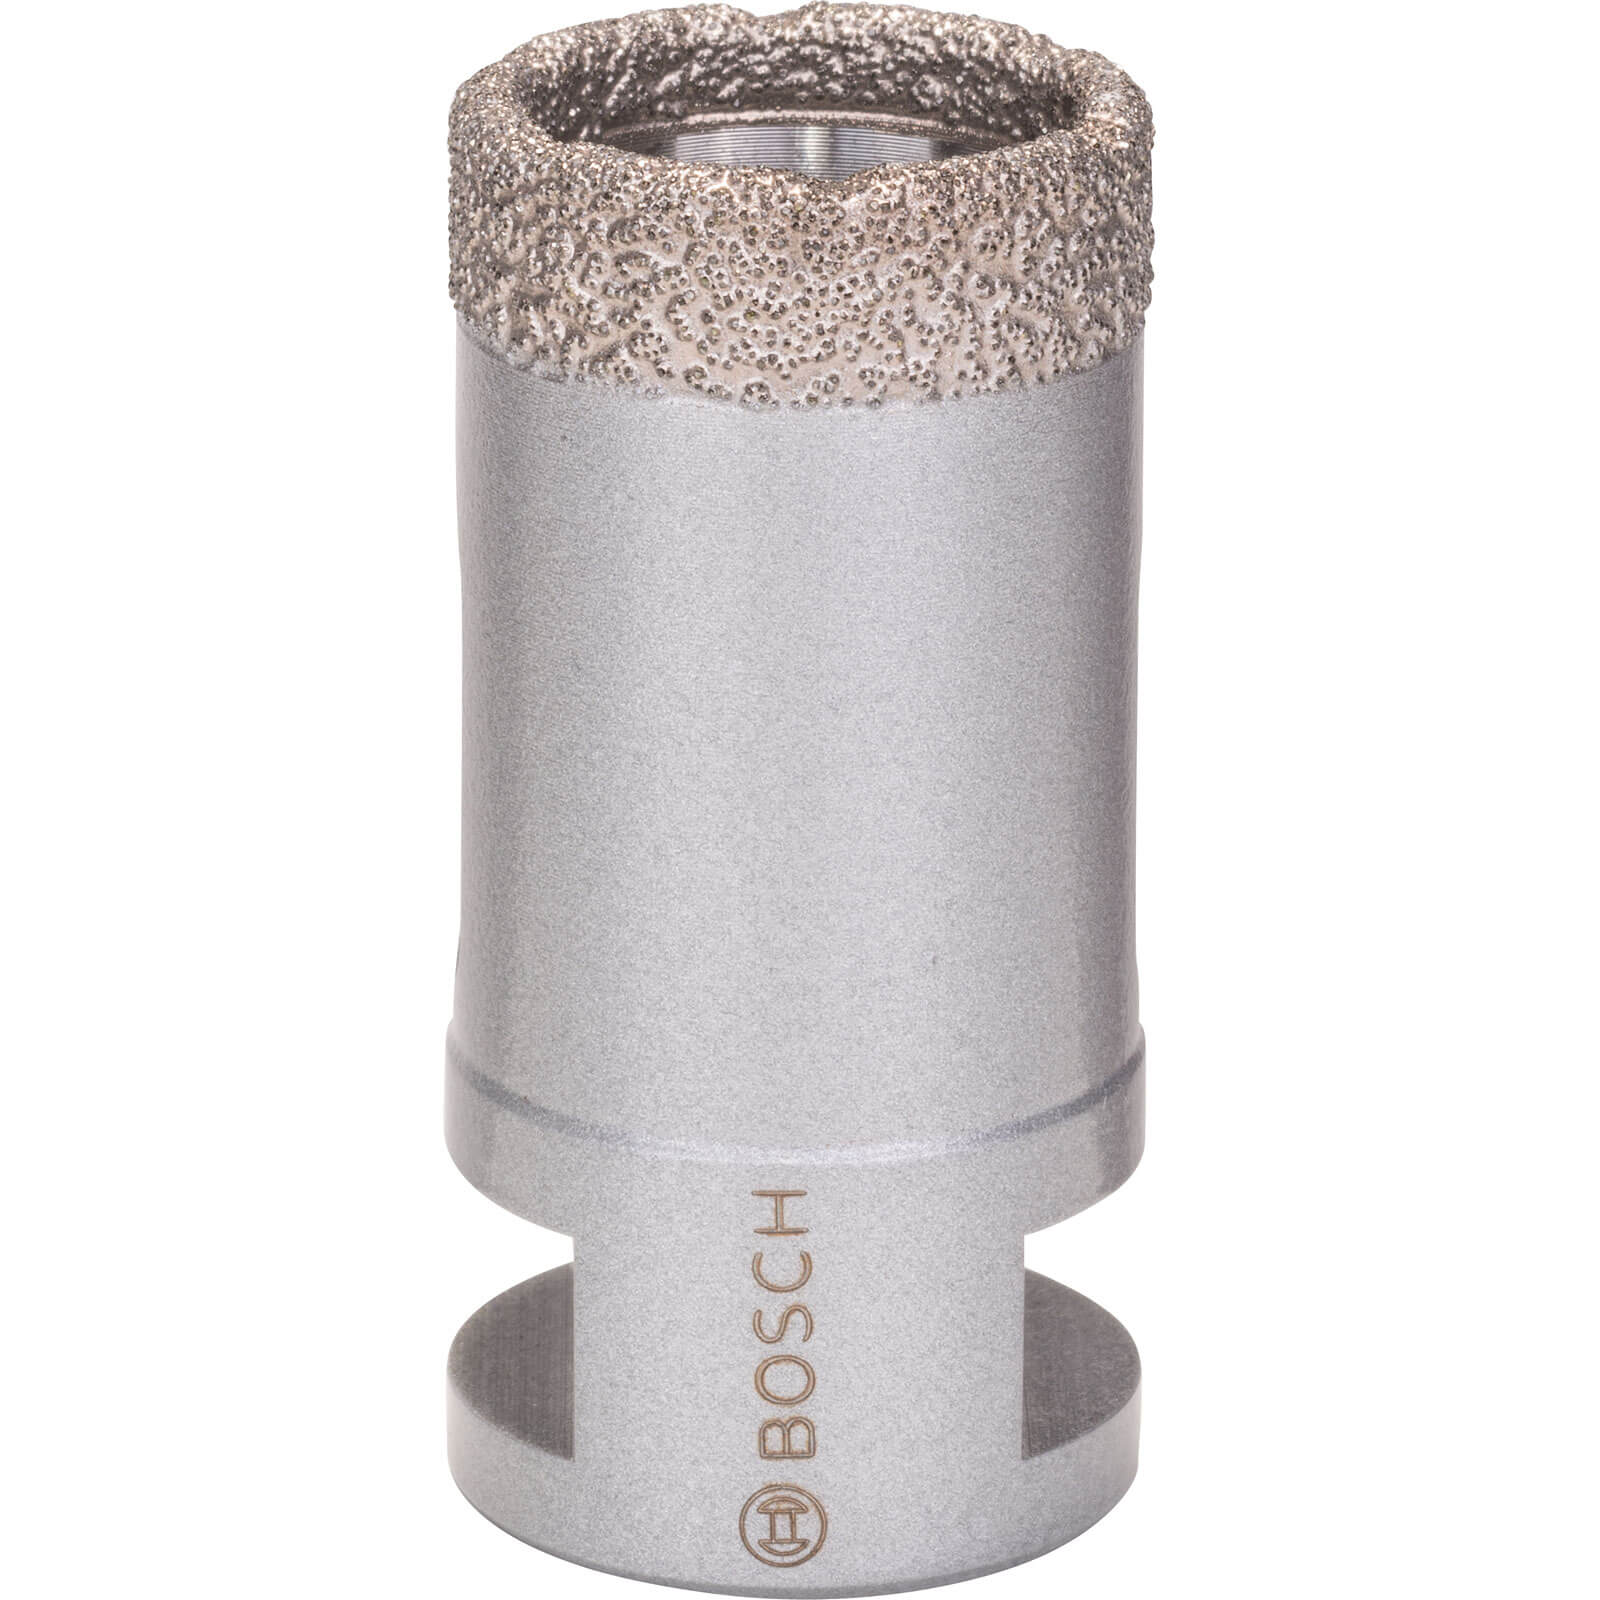 Photo of Bosch Angle Grinder Dry Diamond Hole Cutter For Ceramics 30mm